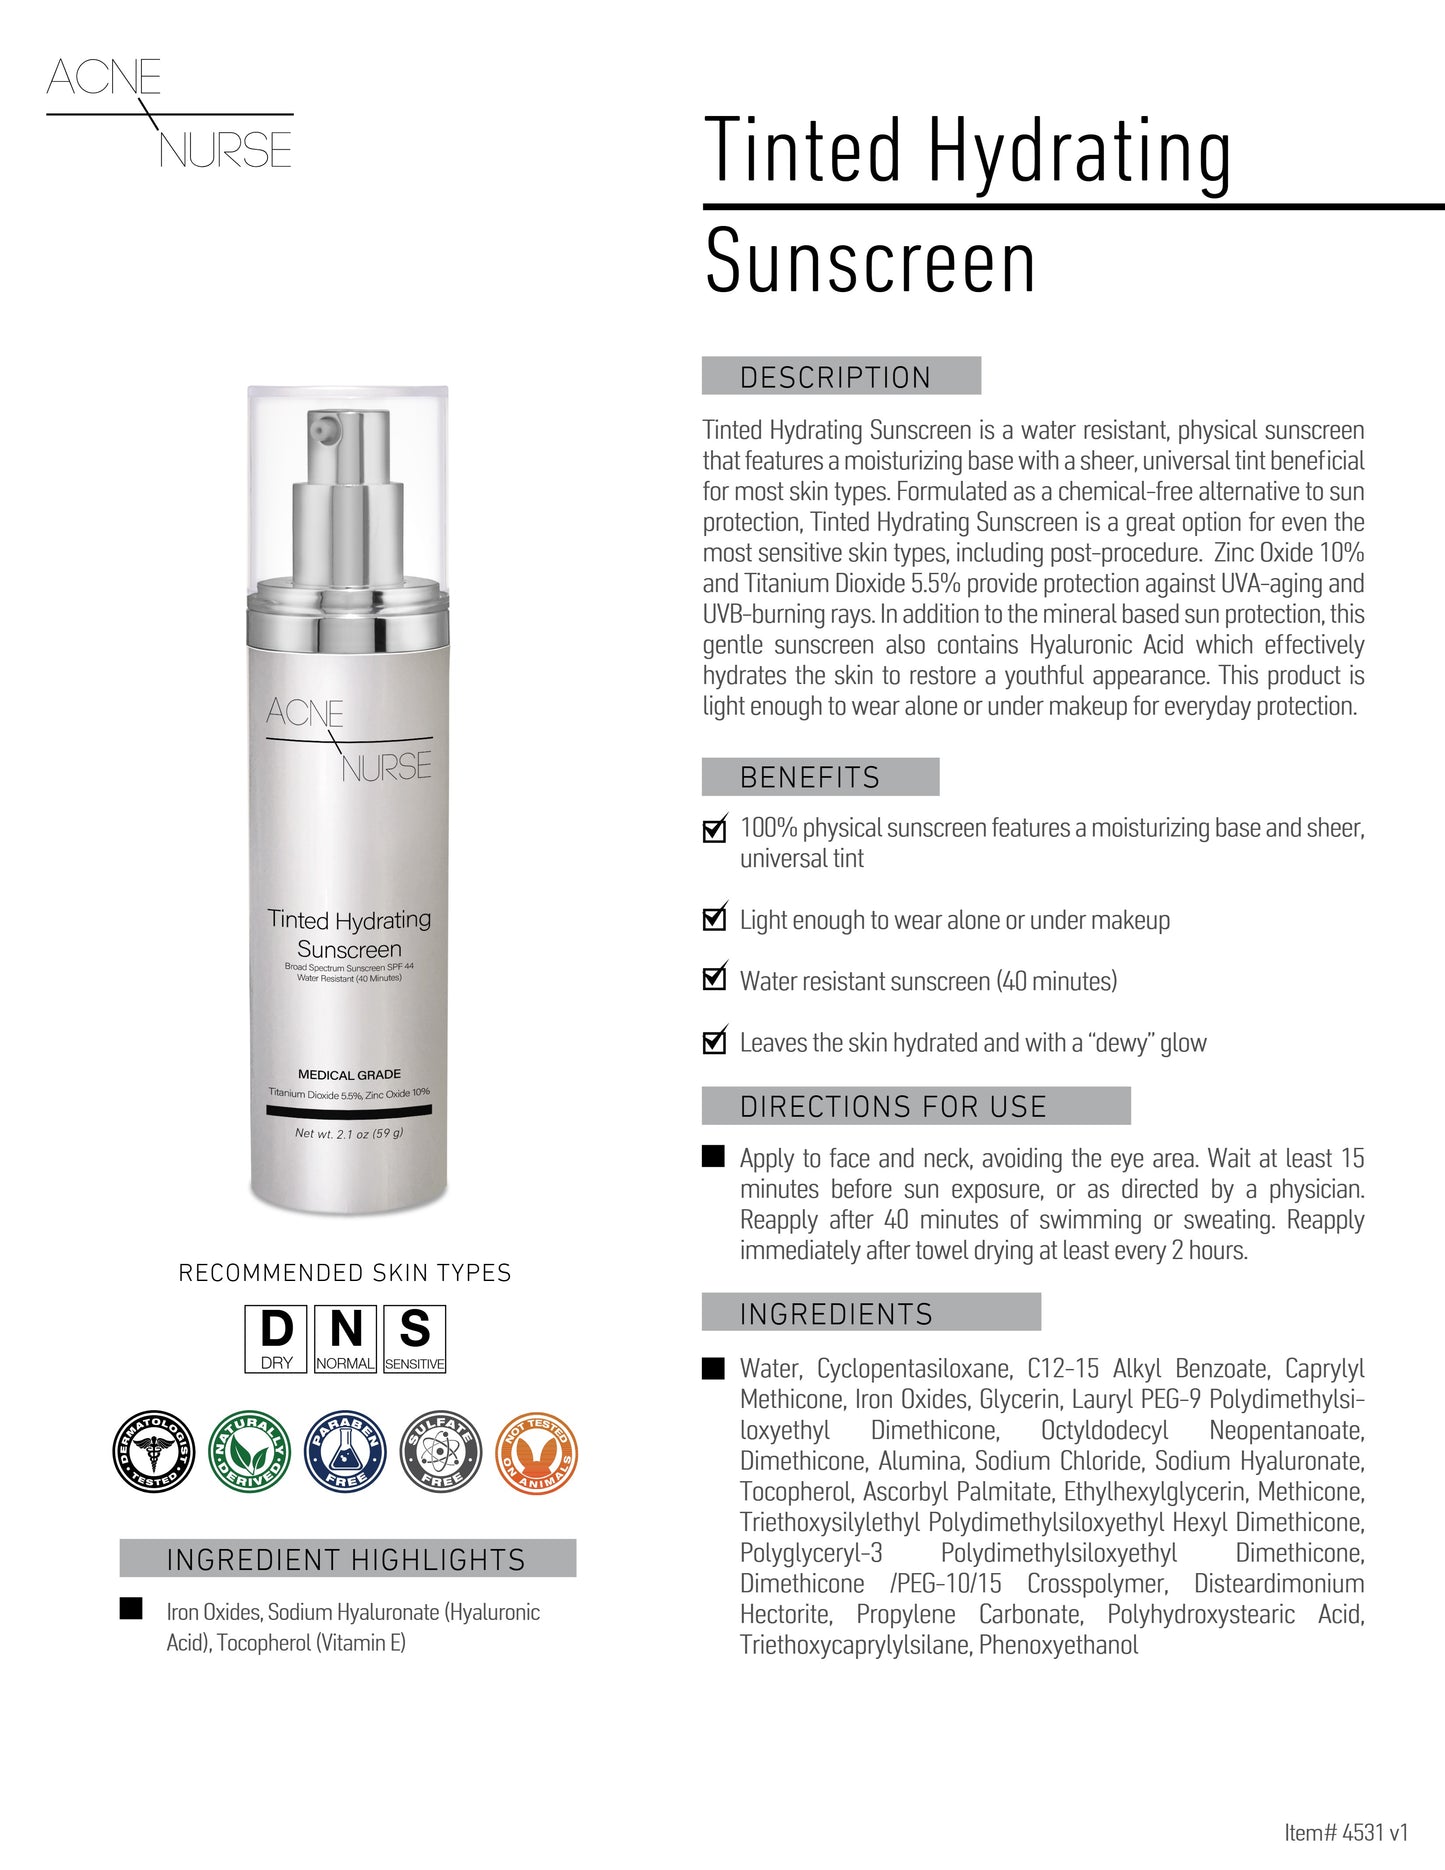 Tinted Hydrating SPF